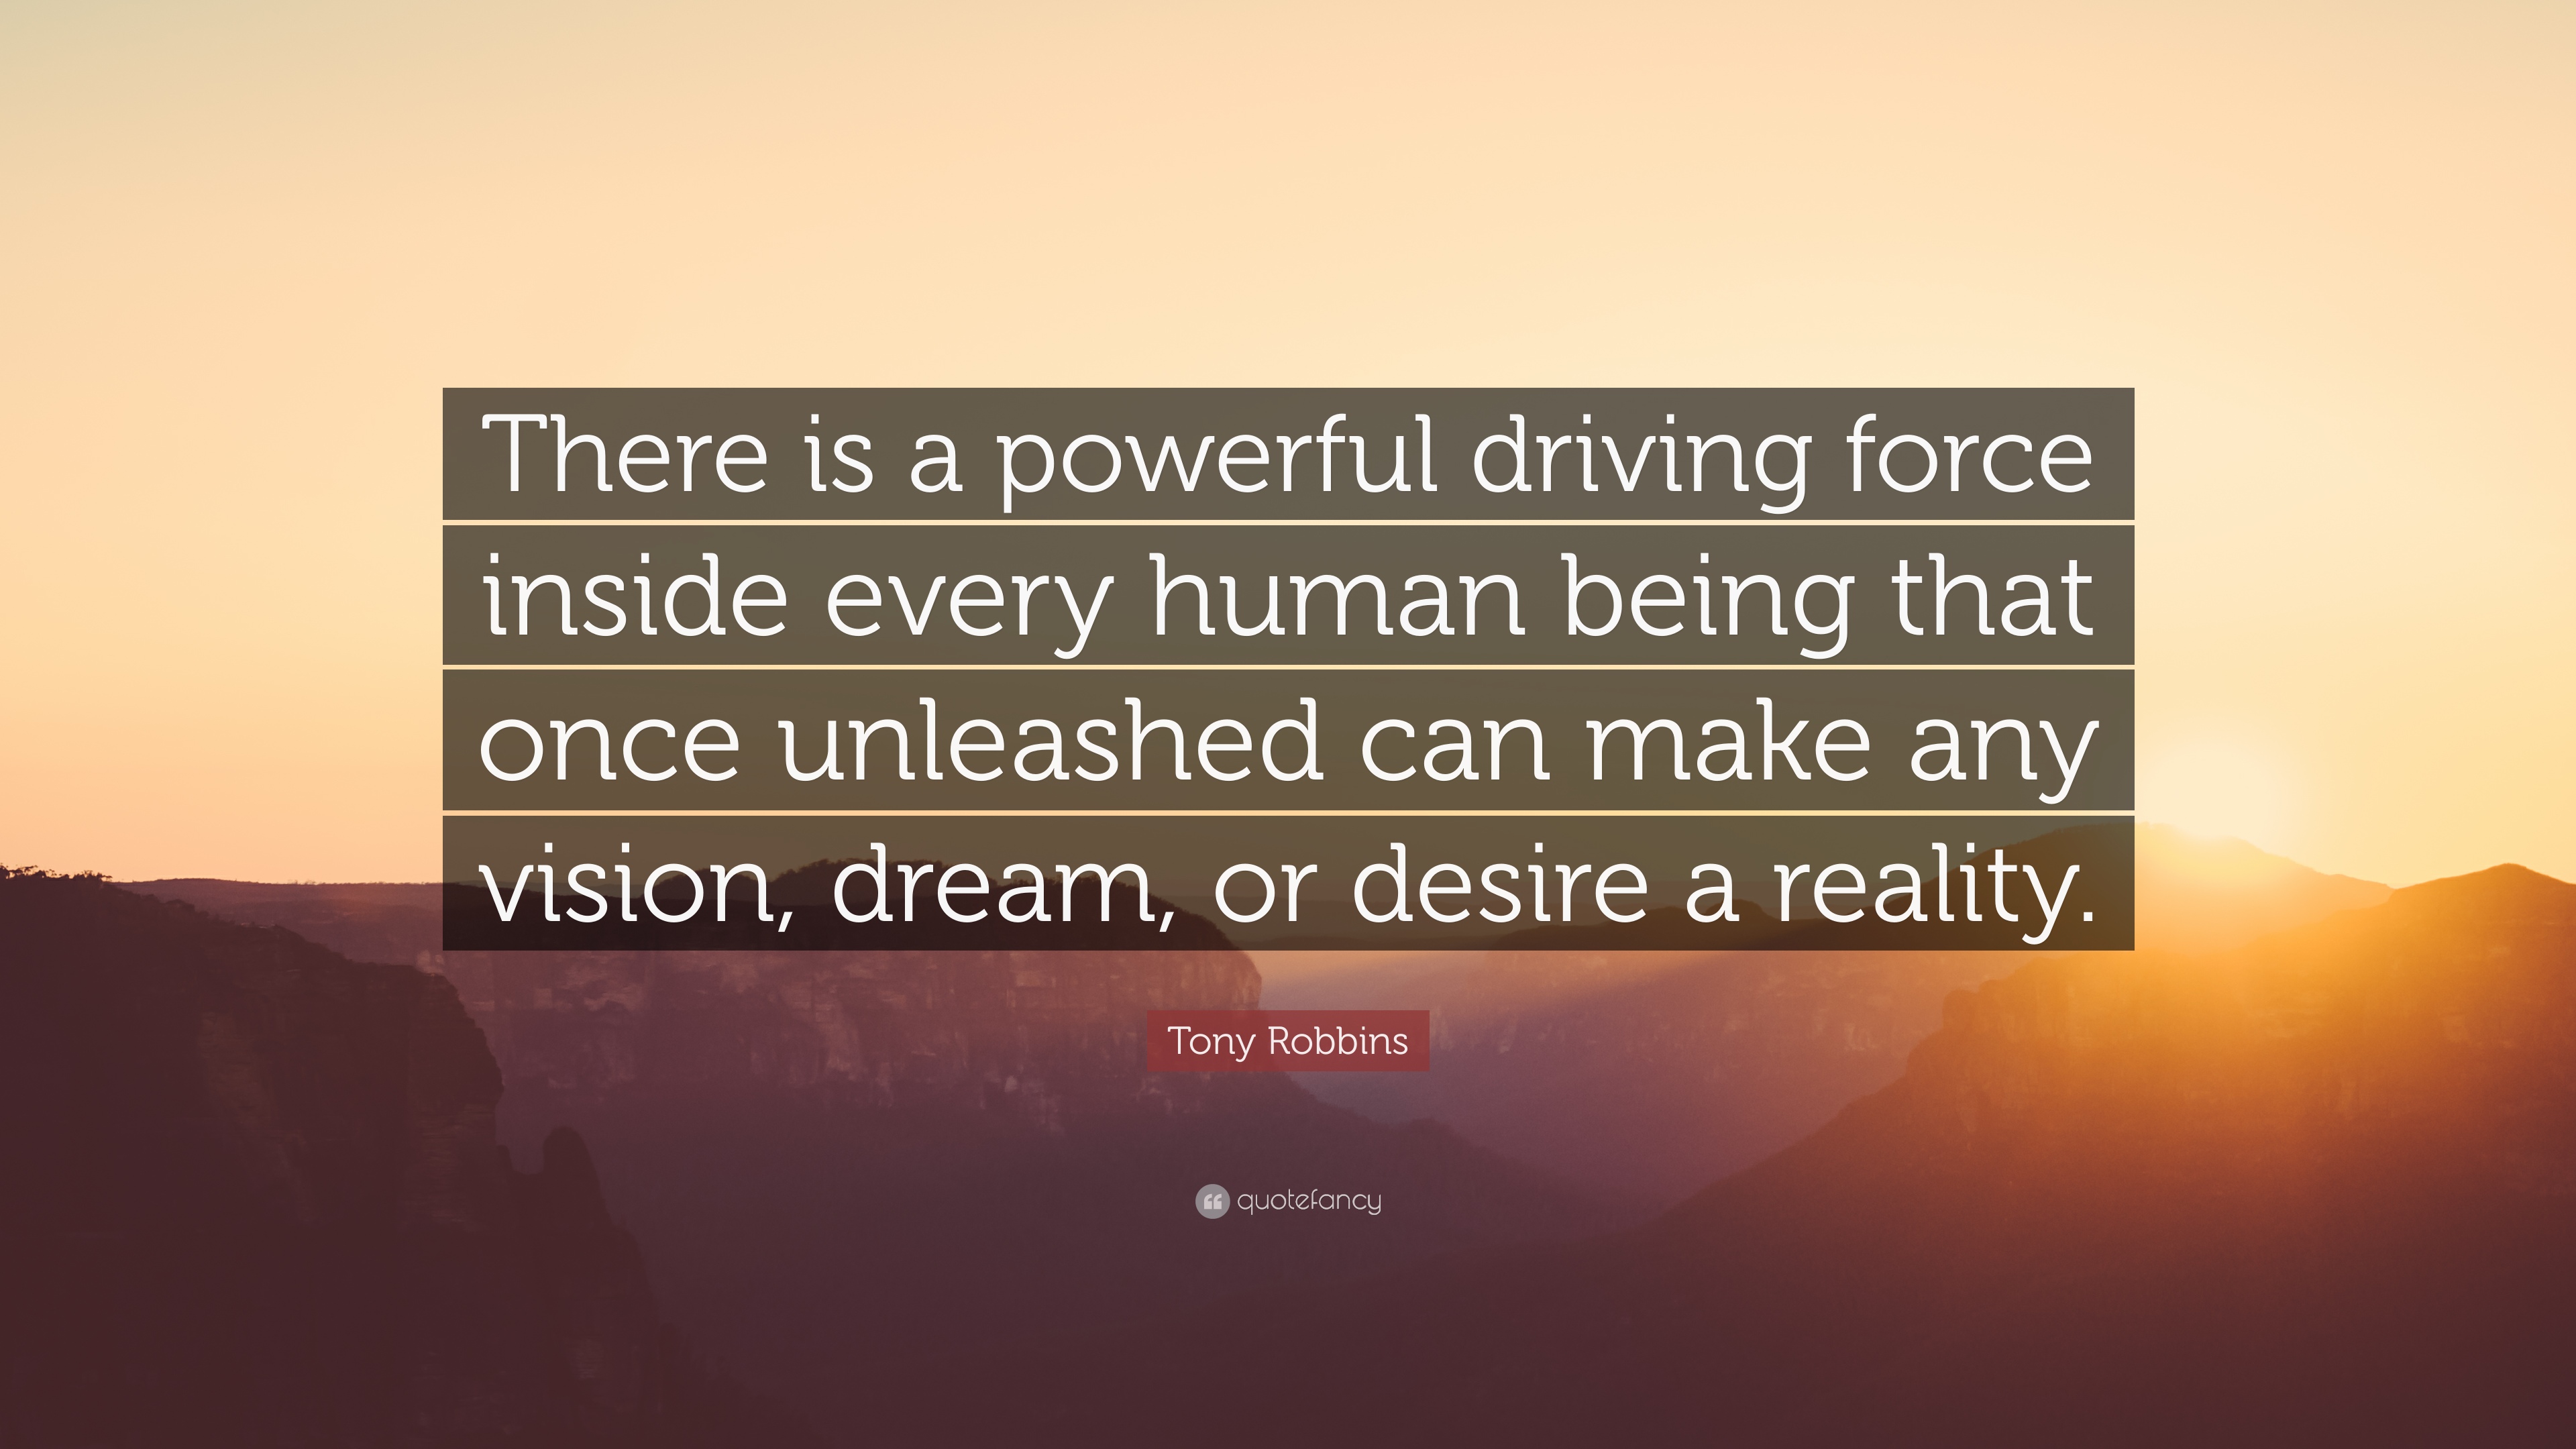 Quote: There is a powerful driving force inside every human being that, once unleashed, can make any vision, dream, or desire a reality.
								